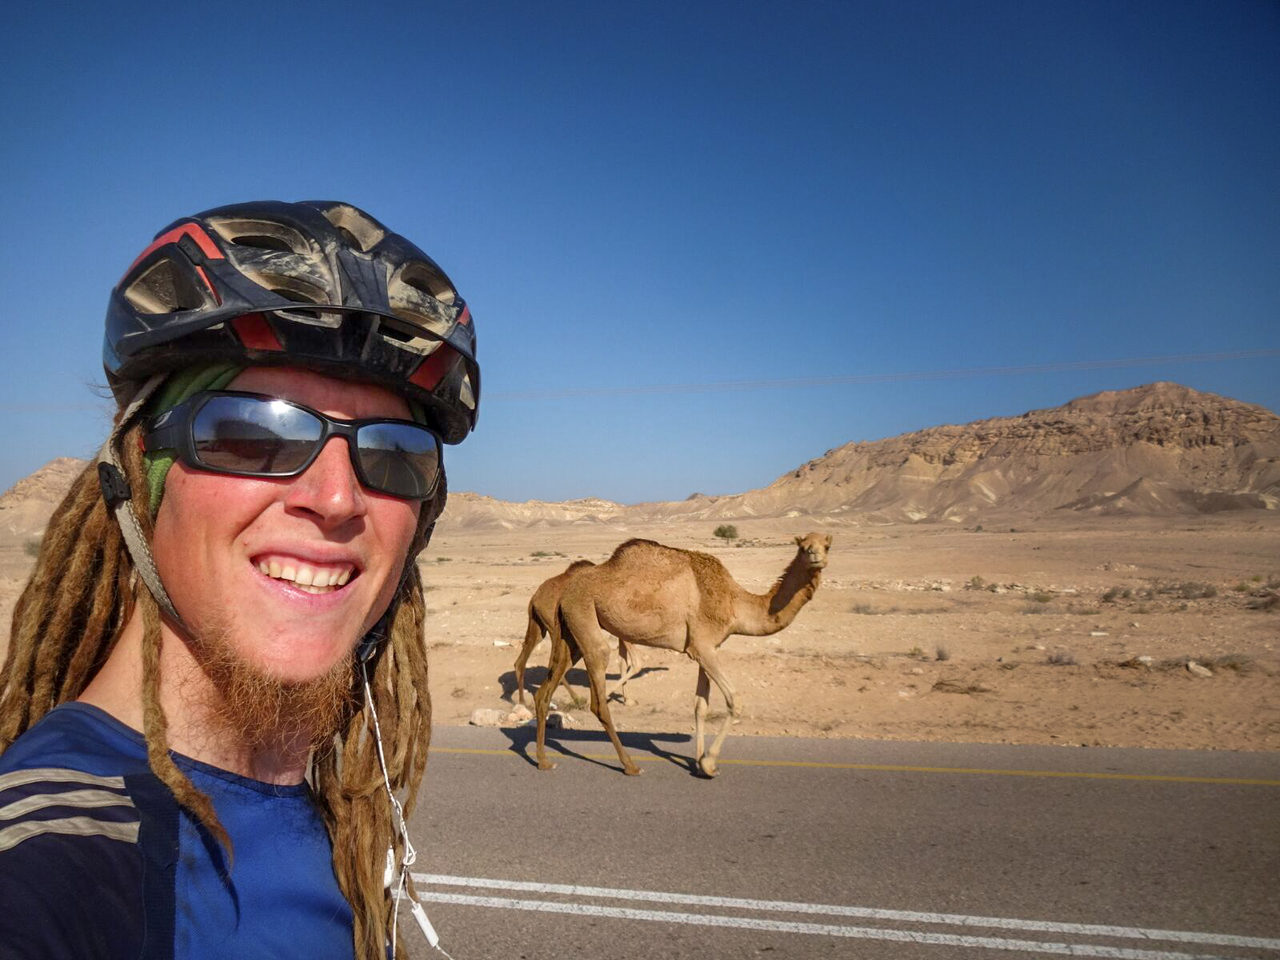 Selfie with a camel in Oman